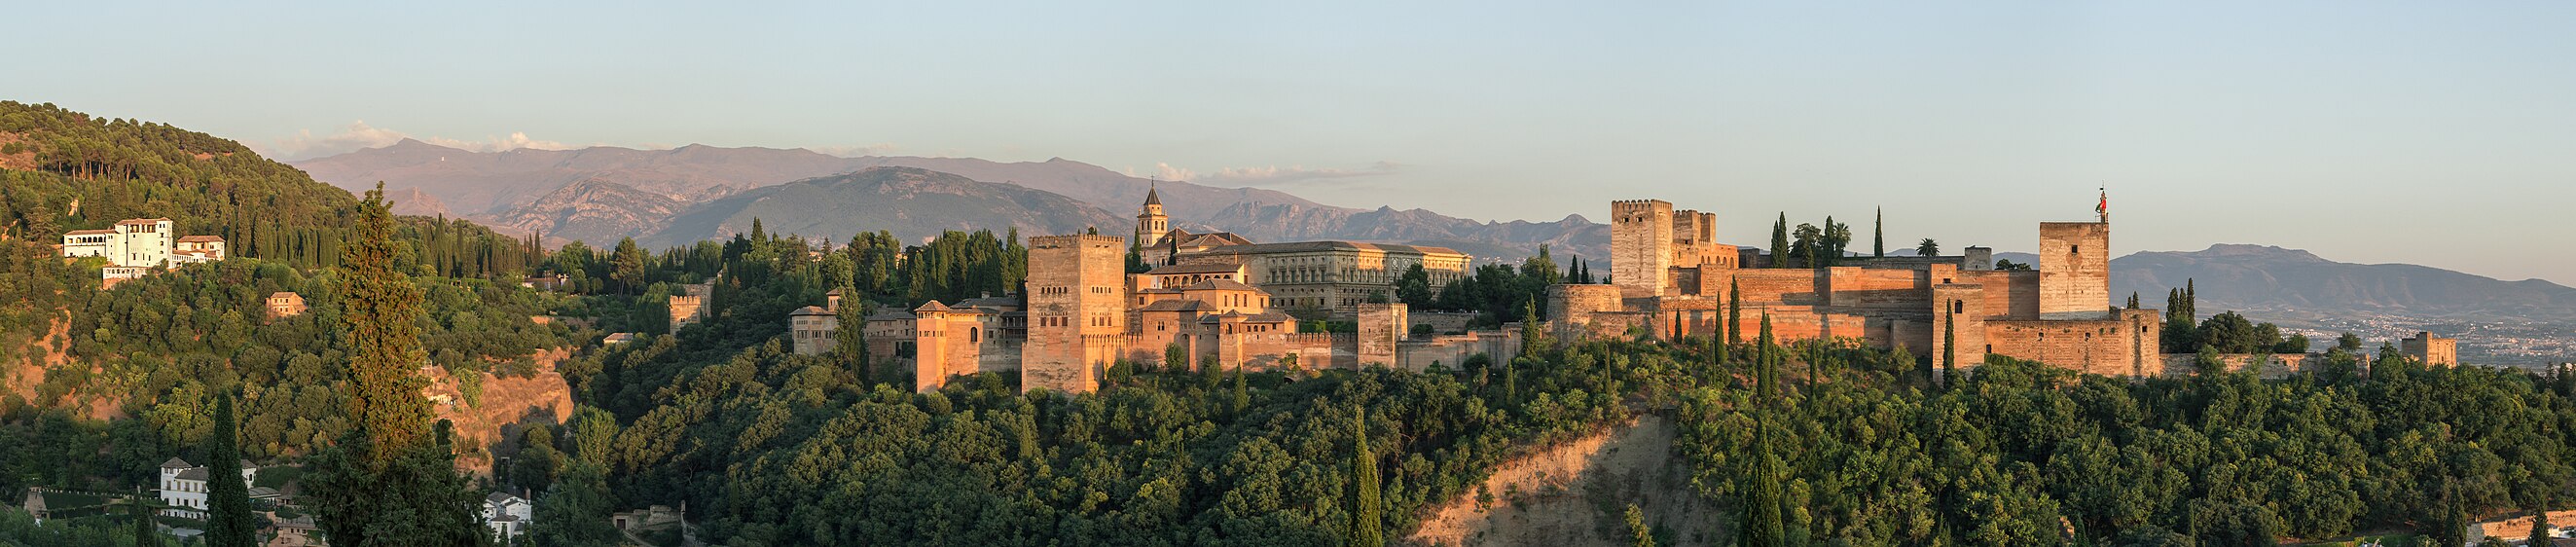 An evening panorama of the Alhambra as seen from Mirador de San Nicolás with the Sierra Nevada mountain range in the background. From left to right: Generalife, Pico del Veleta (mountain), Palacios Nazaríes, Palace of Charles V, Alcazaba.]]